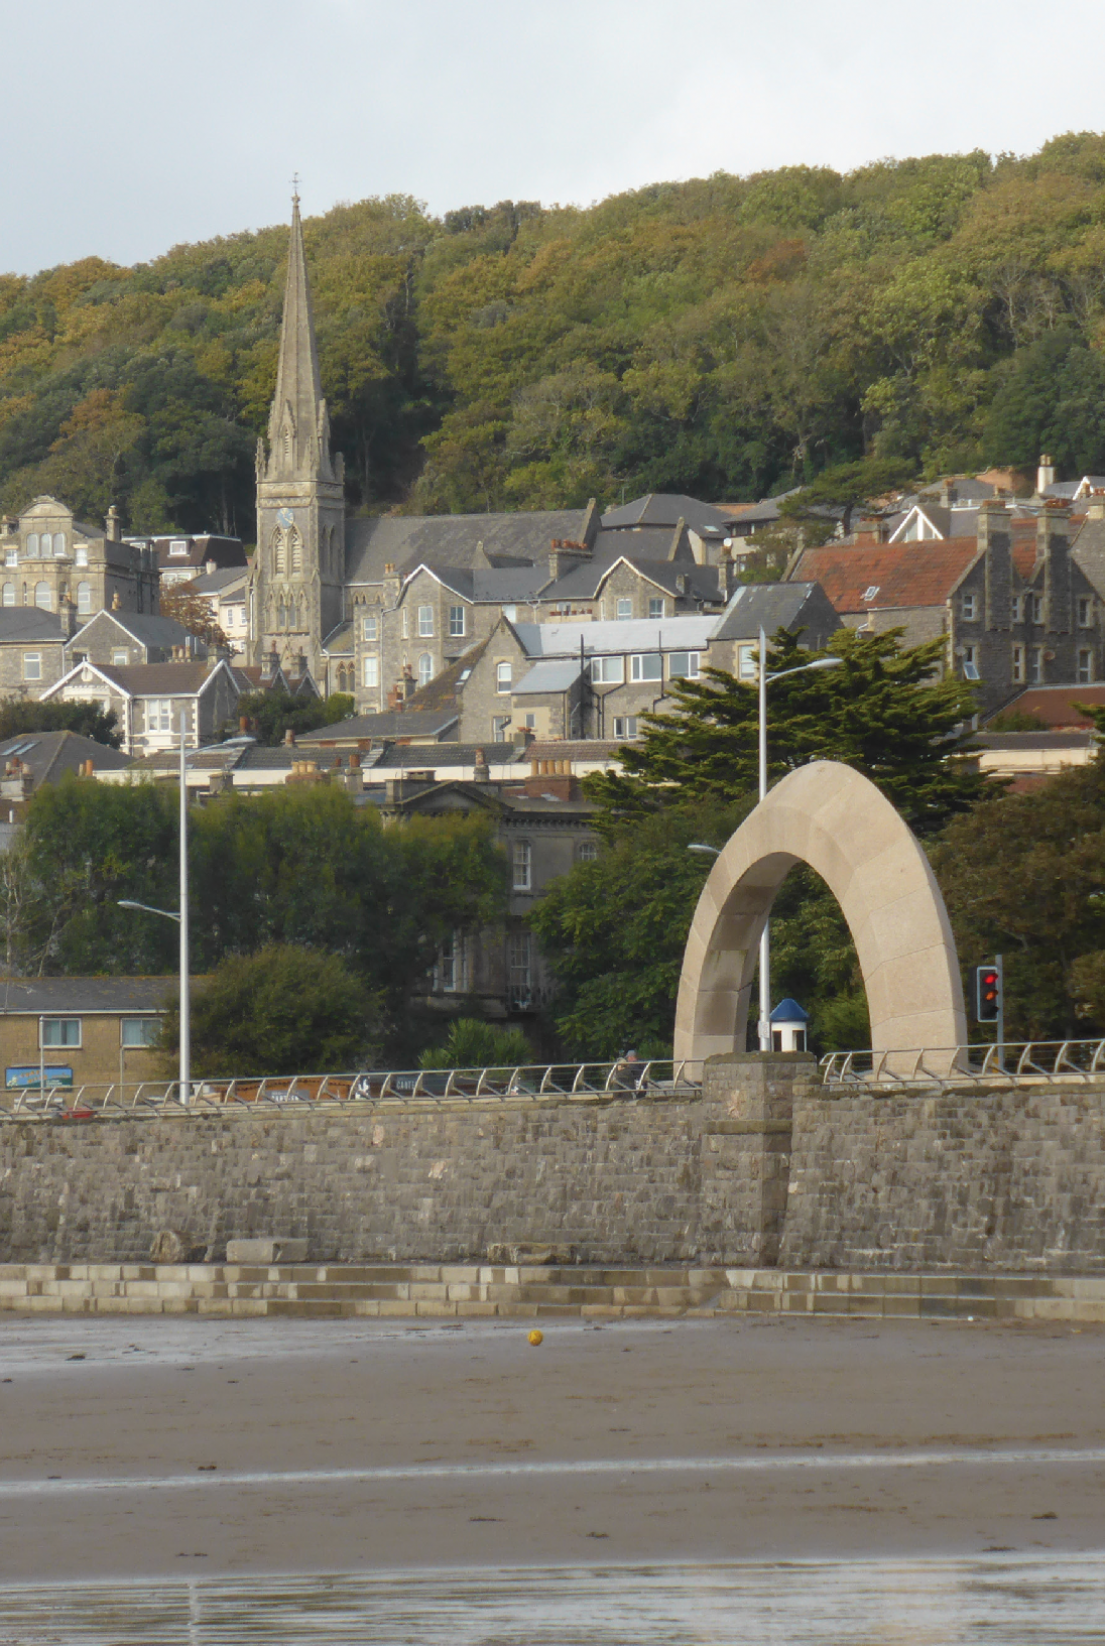 Looking from the beach, this looks up towards the stone wall, a arch of stone over an exit, with the town in the background with a large wood behind.